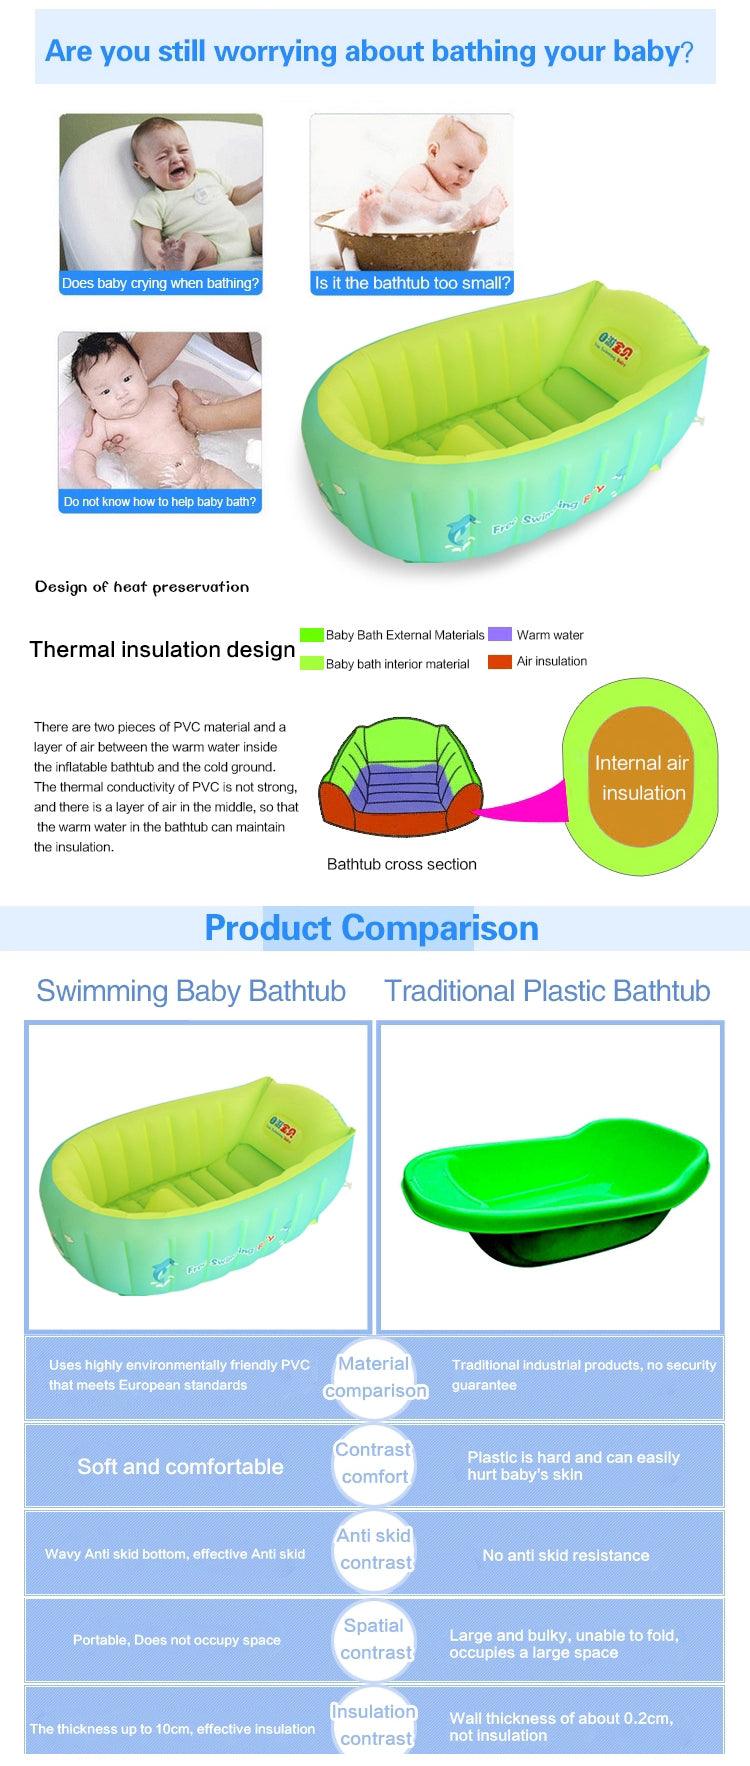 New Large Portable Folding Kids Child Bathtub - Inflatable Baby Bath Tub Set For Newborn - Swimming Pool for 0-8 years old (4X1)